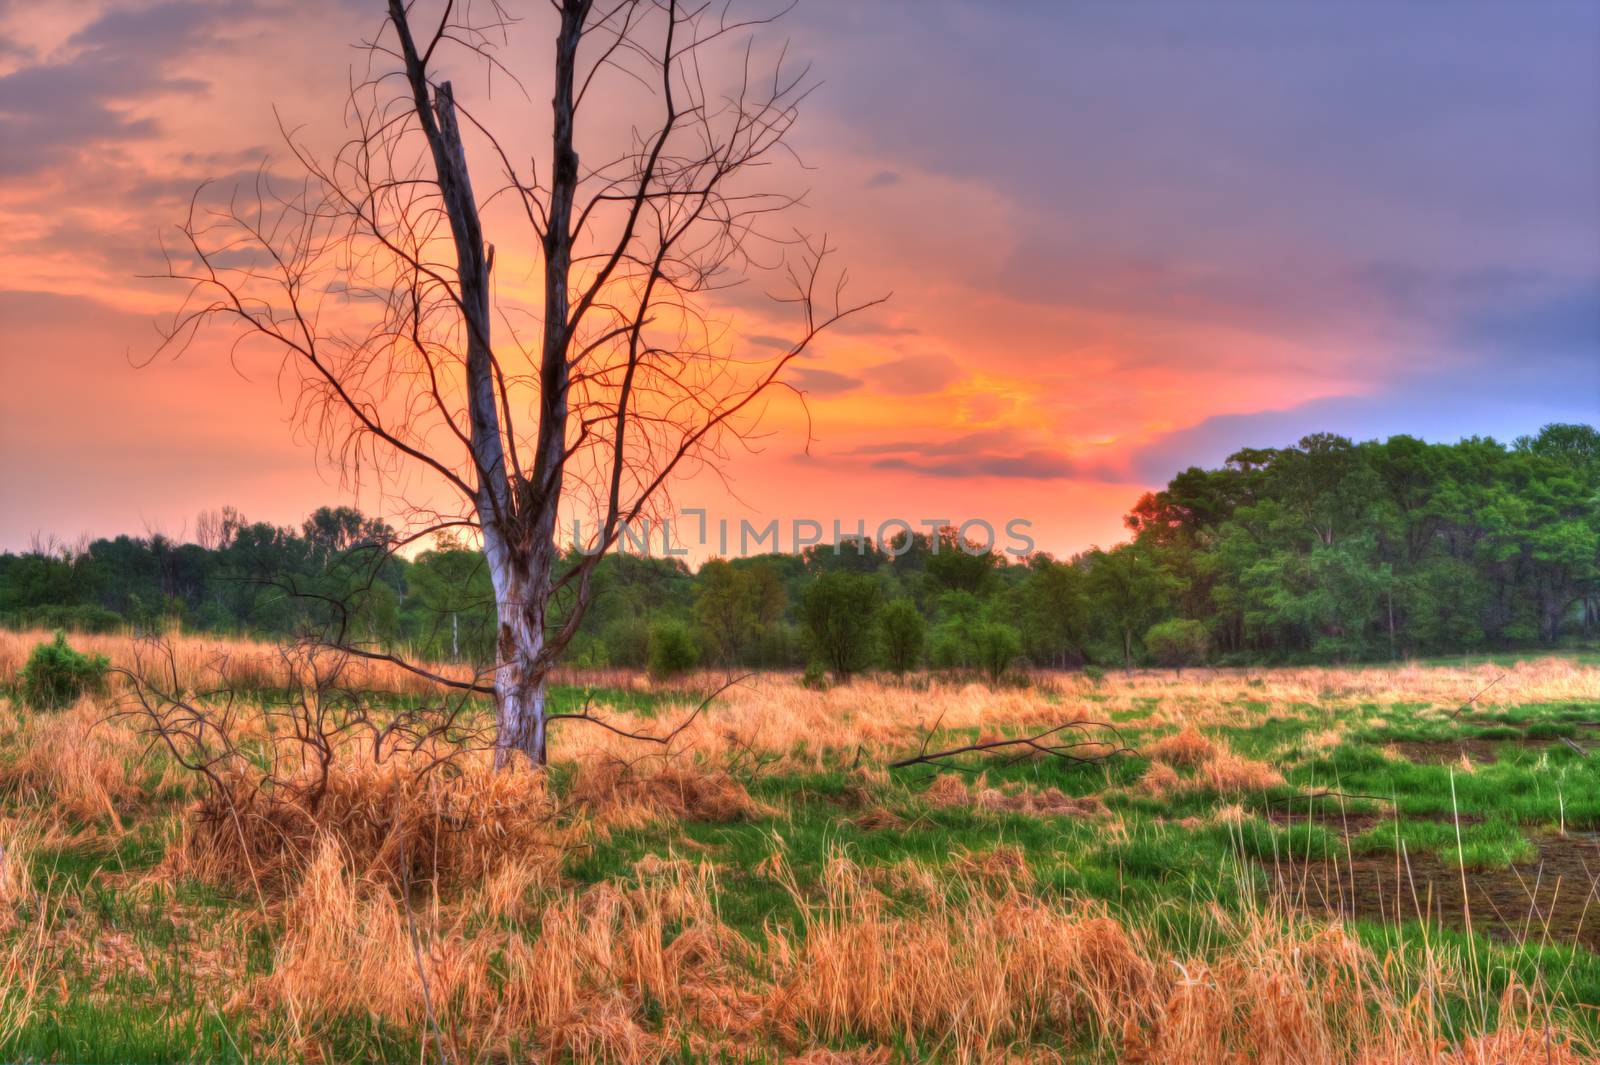 An HDR landscape of tress and a meadow in soft focus